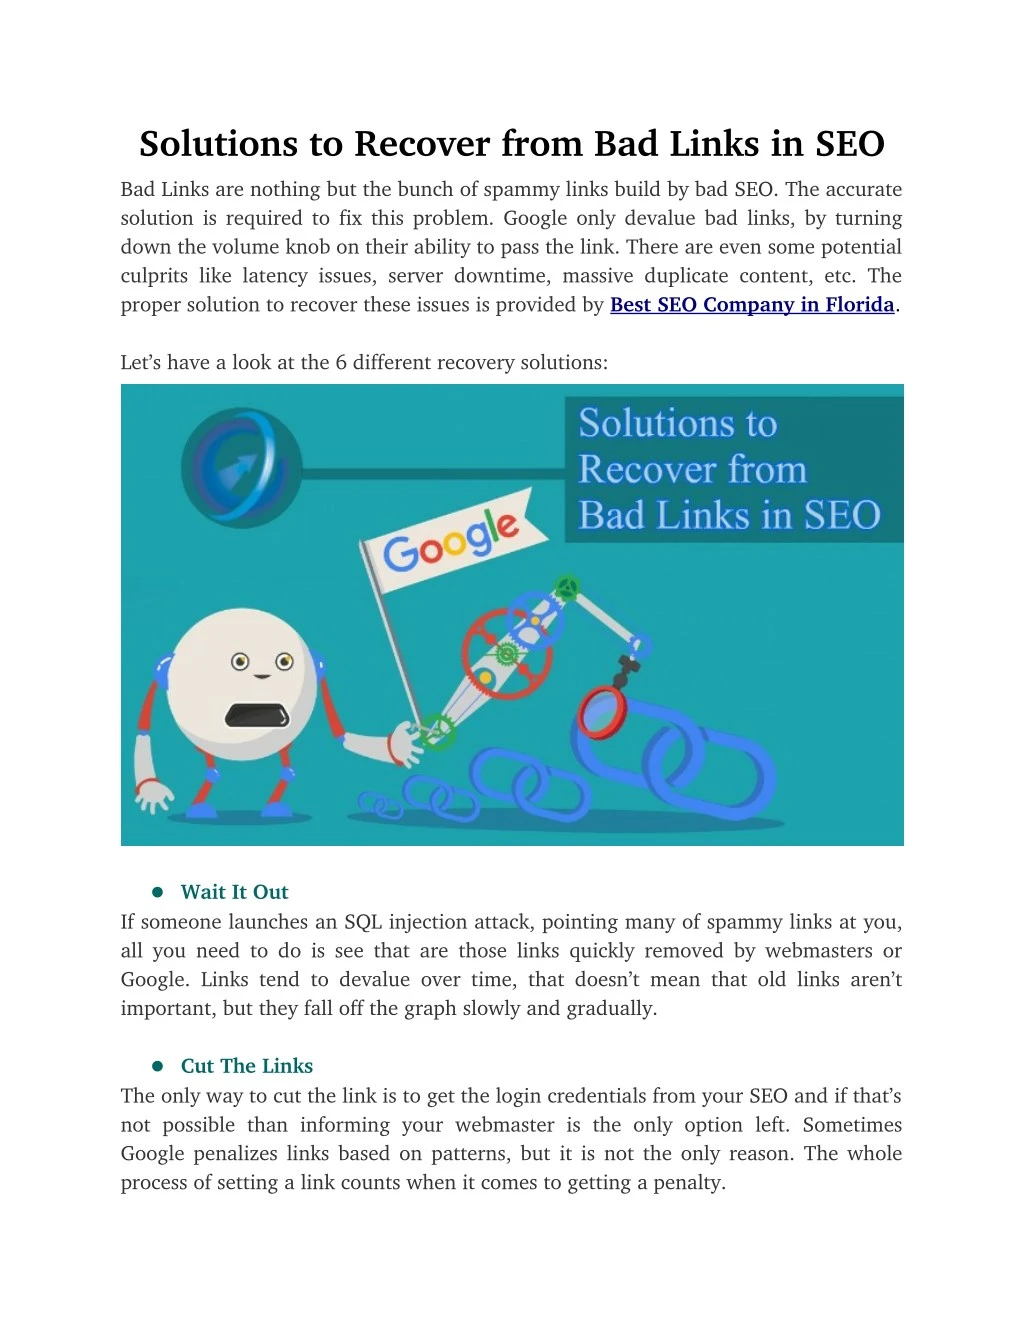 solutions to recover from bad links in seo